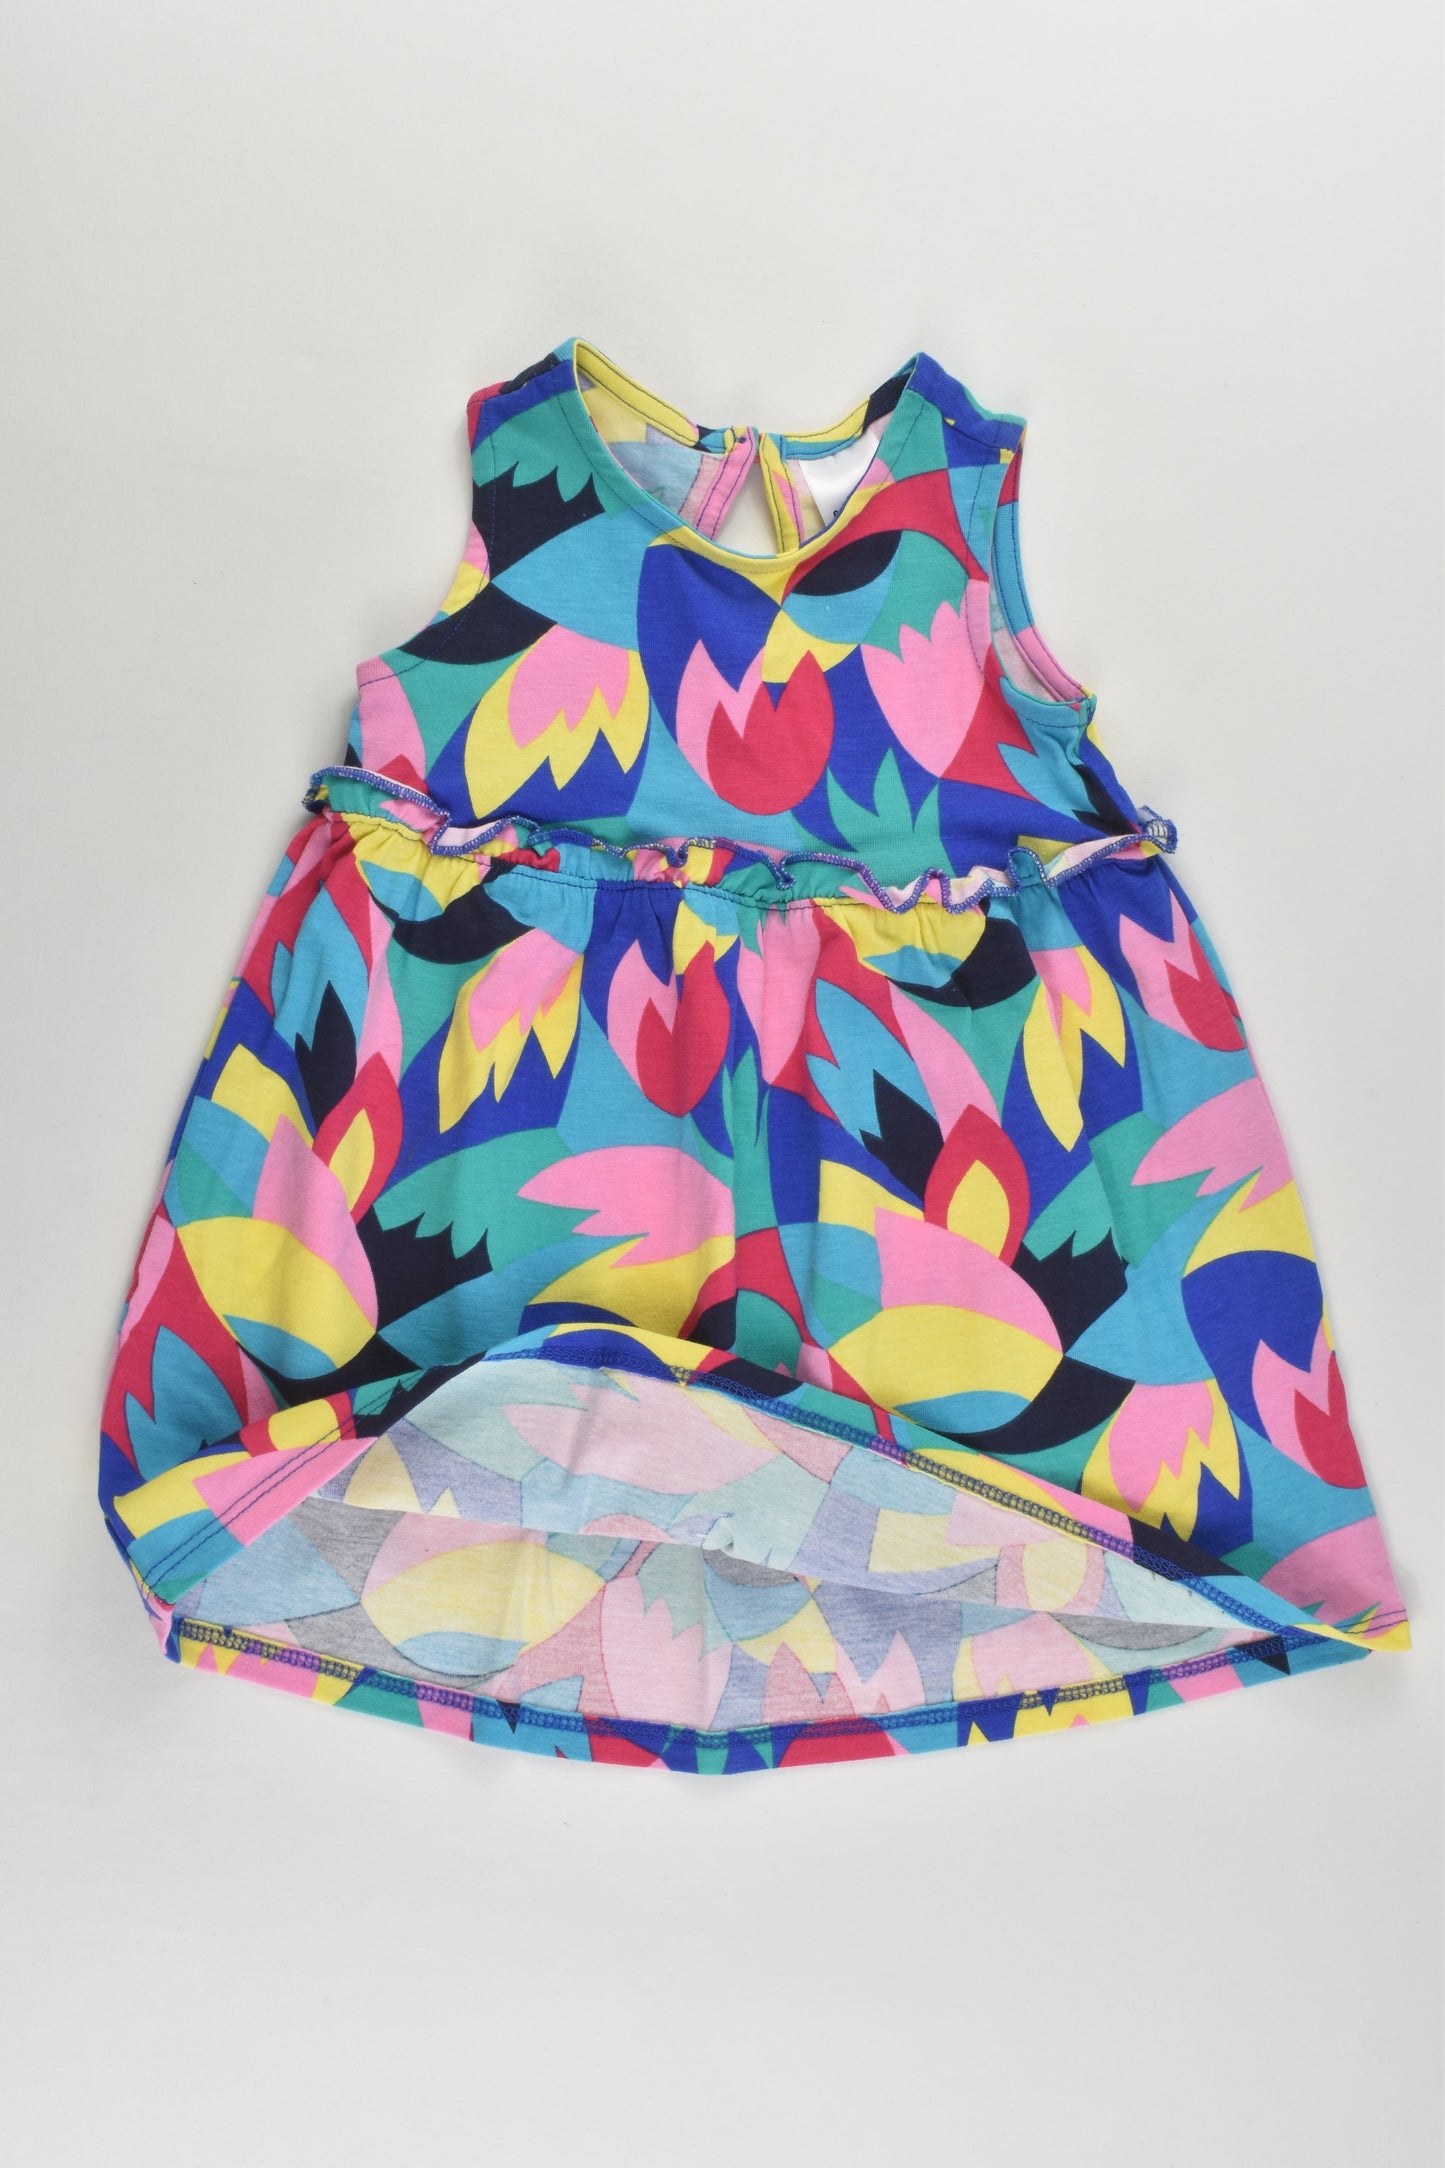 Target Size 0 (6-12 months) Colorful Dress